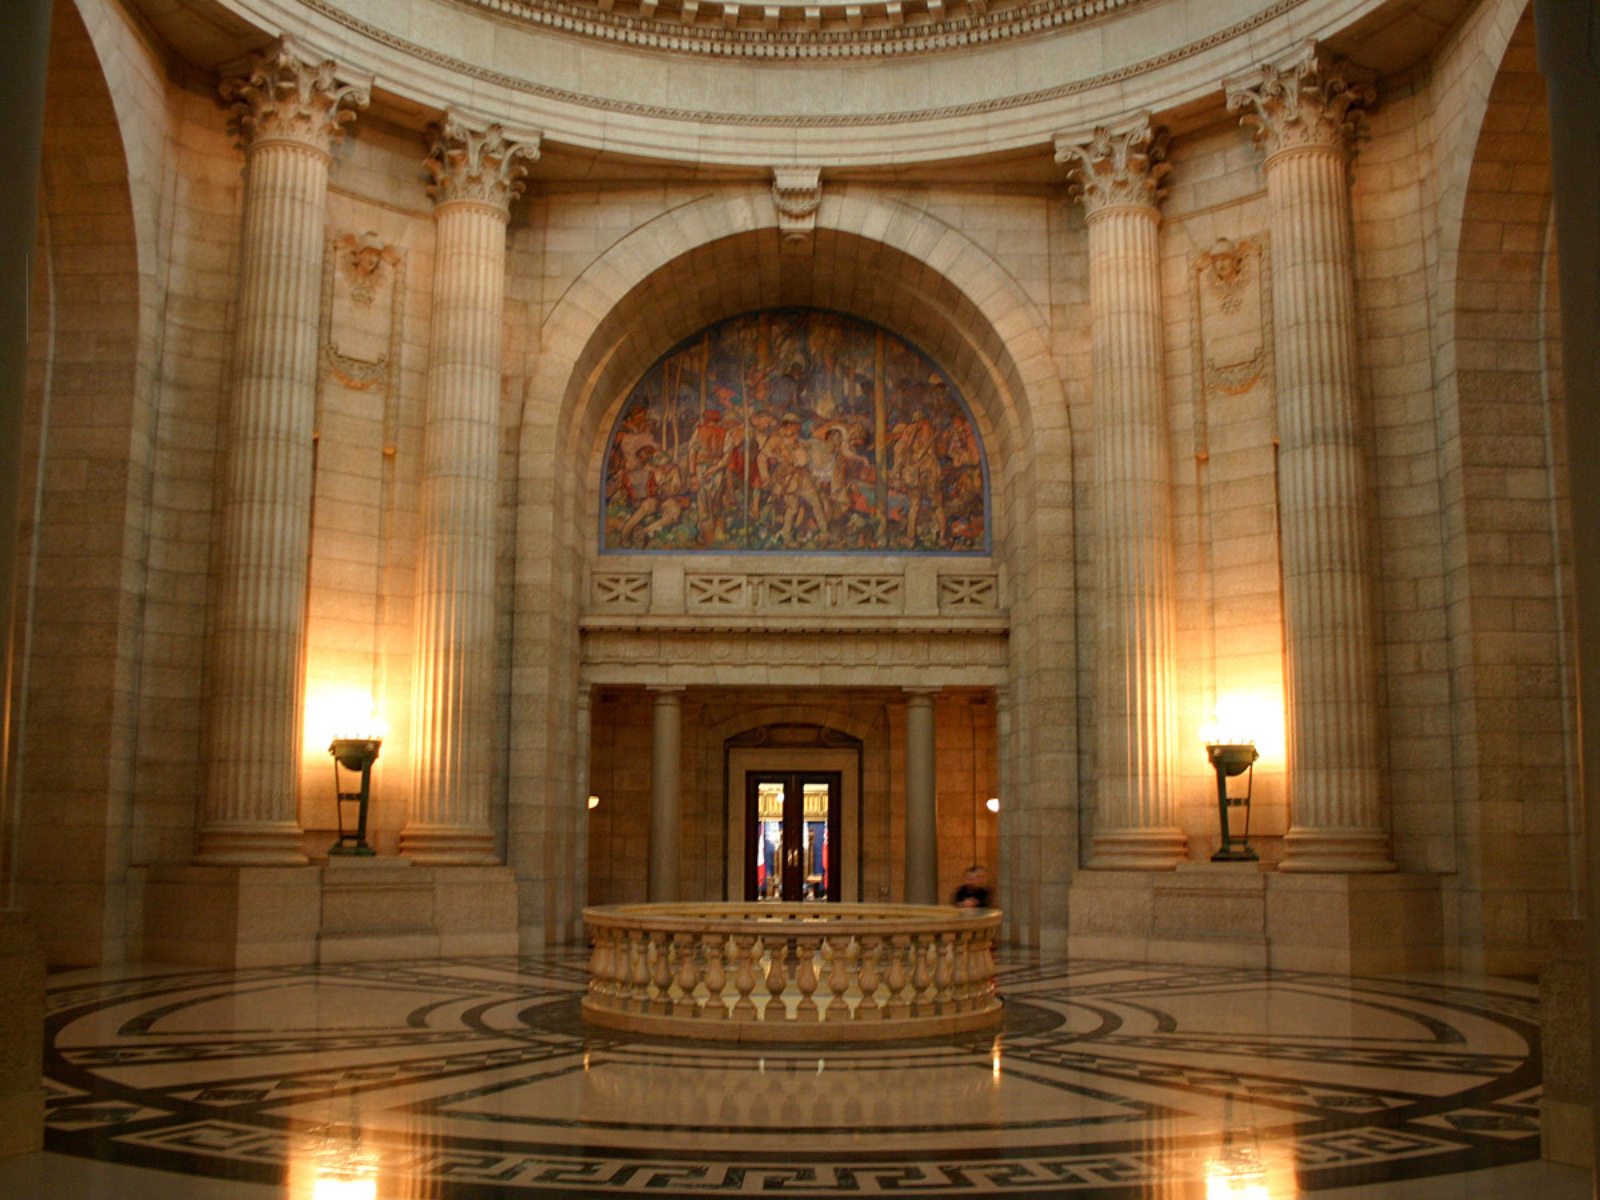 Looking towards the Rotunda in the Manitoba Legislative Building. A large foyer space with a fenced empty circling in the middle, looking down tot he floor below. Tall Tydall Stone walls with pillars encircle the space, with three arched doorways in frame.